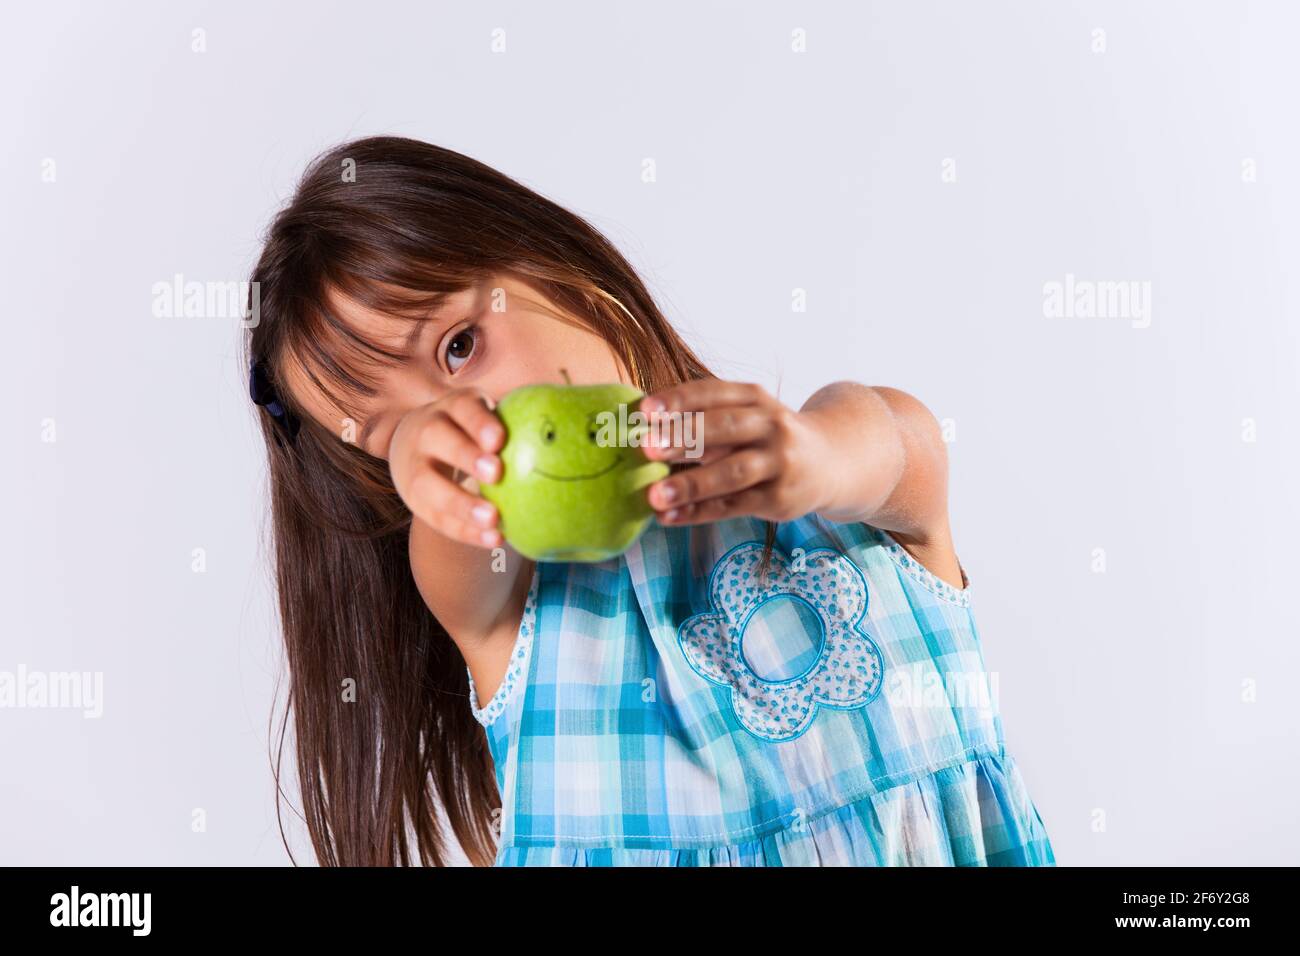 Little girl showing a green apple with a smile Stock Photo